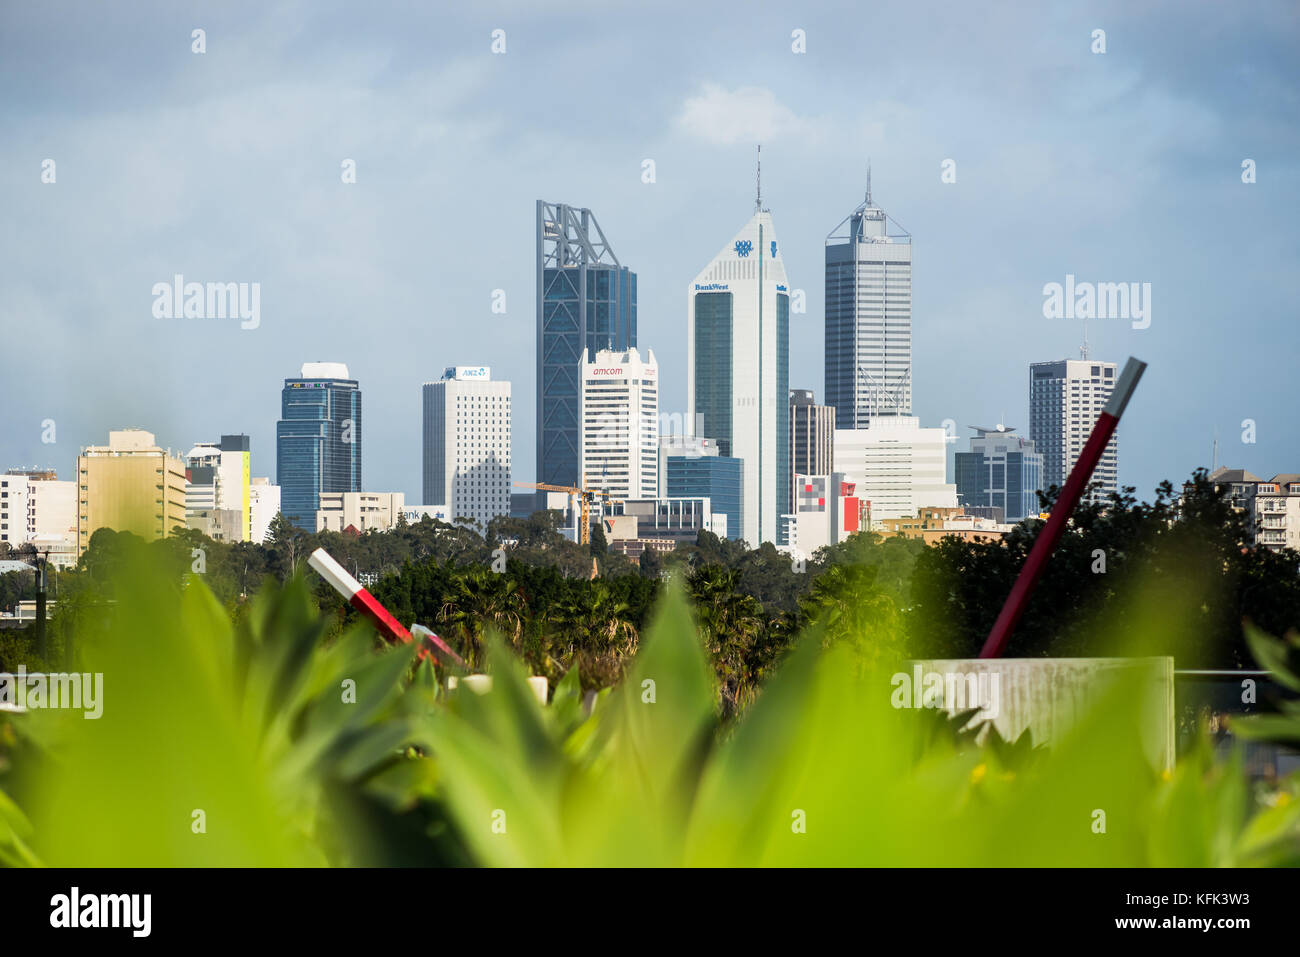 Th Perth city skyline as seen from Burswood in the eastern suburbs of Perth, Western Australia. Stock Photo